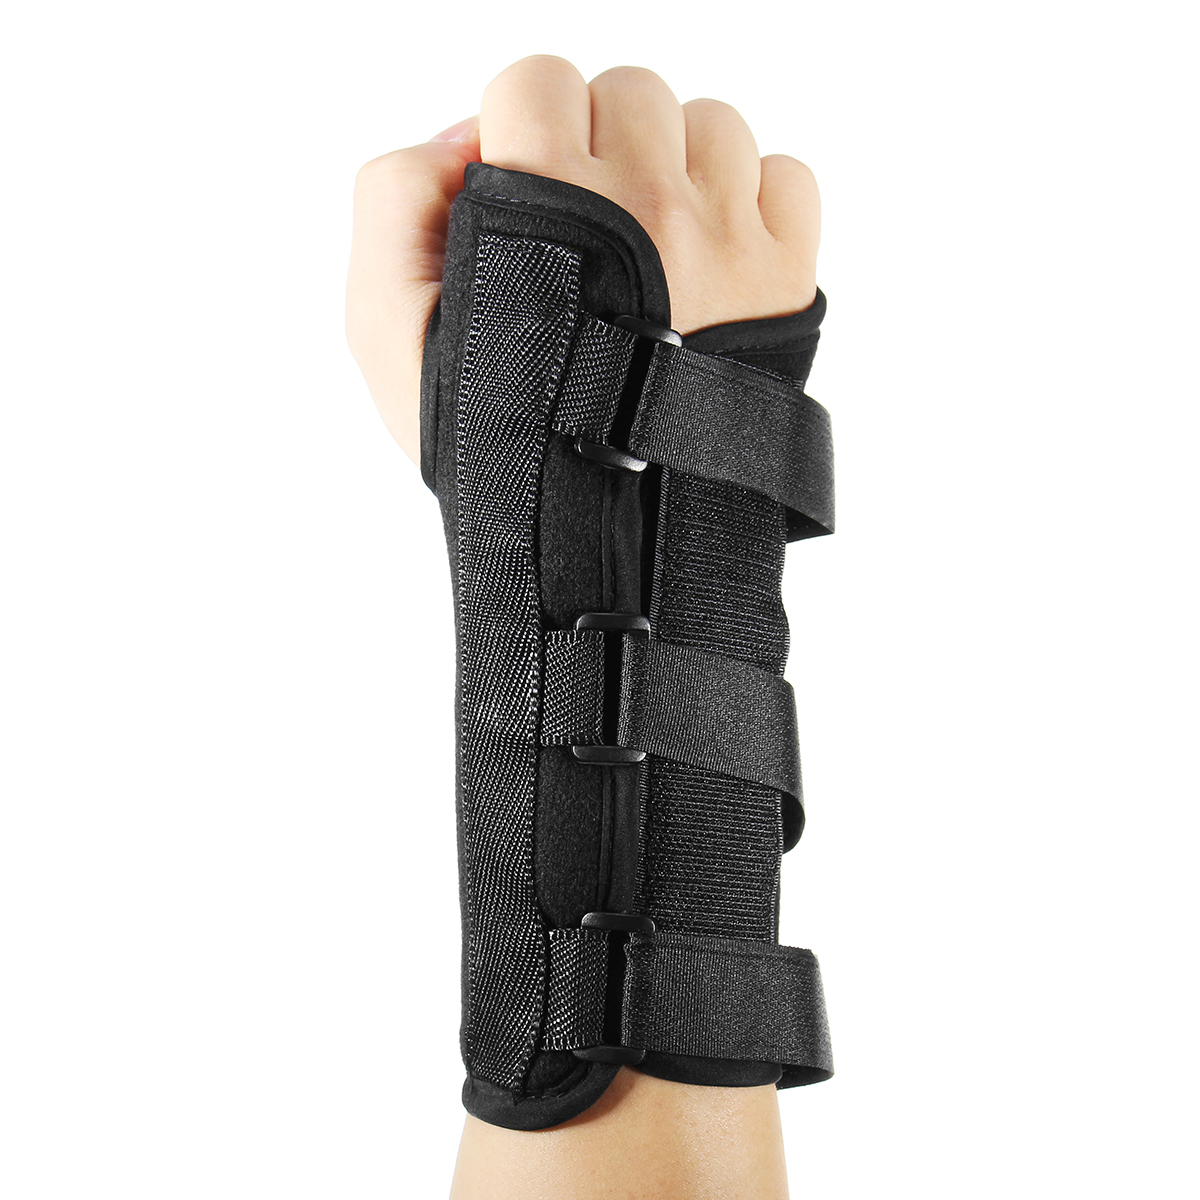 1Pair-Right-Left-Hands-Breathable-Night-Wrist-Brace-Sleep-Support-Carpal-Tunnel-Comfort-Composite-Fa-1212318-11